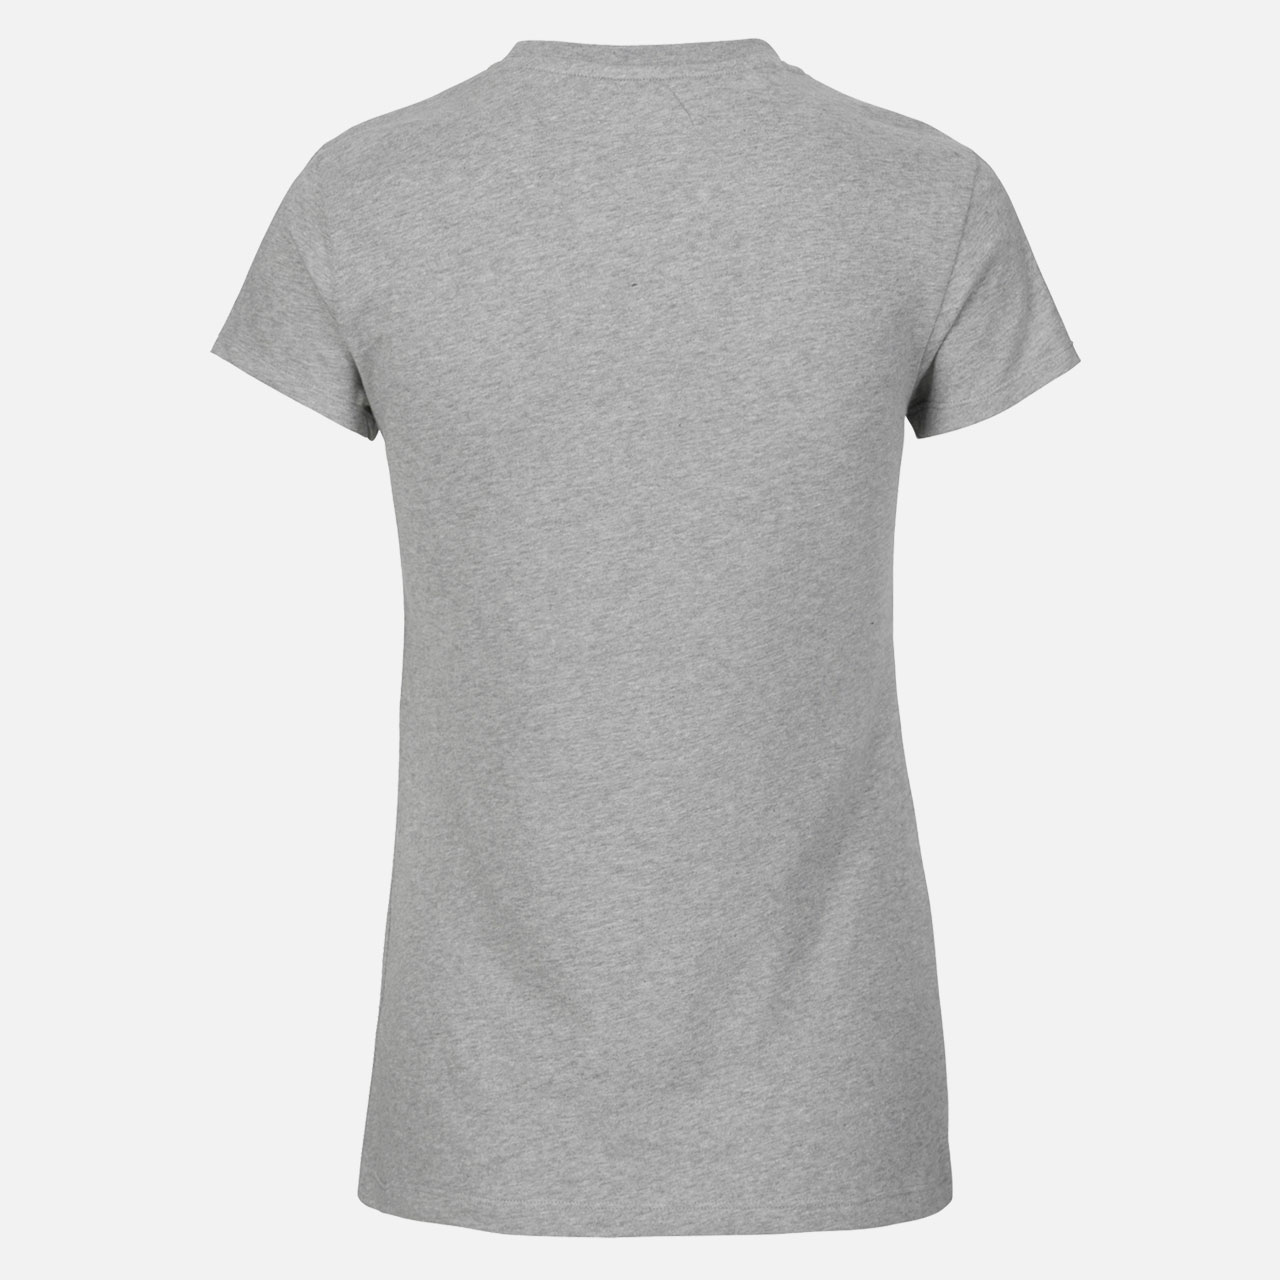 Doppelpack Neutral® Ladies Fit T-Shirt - Weiss / Sports Grey XS Weiss / Sports Grey